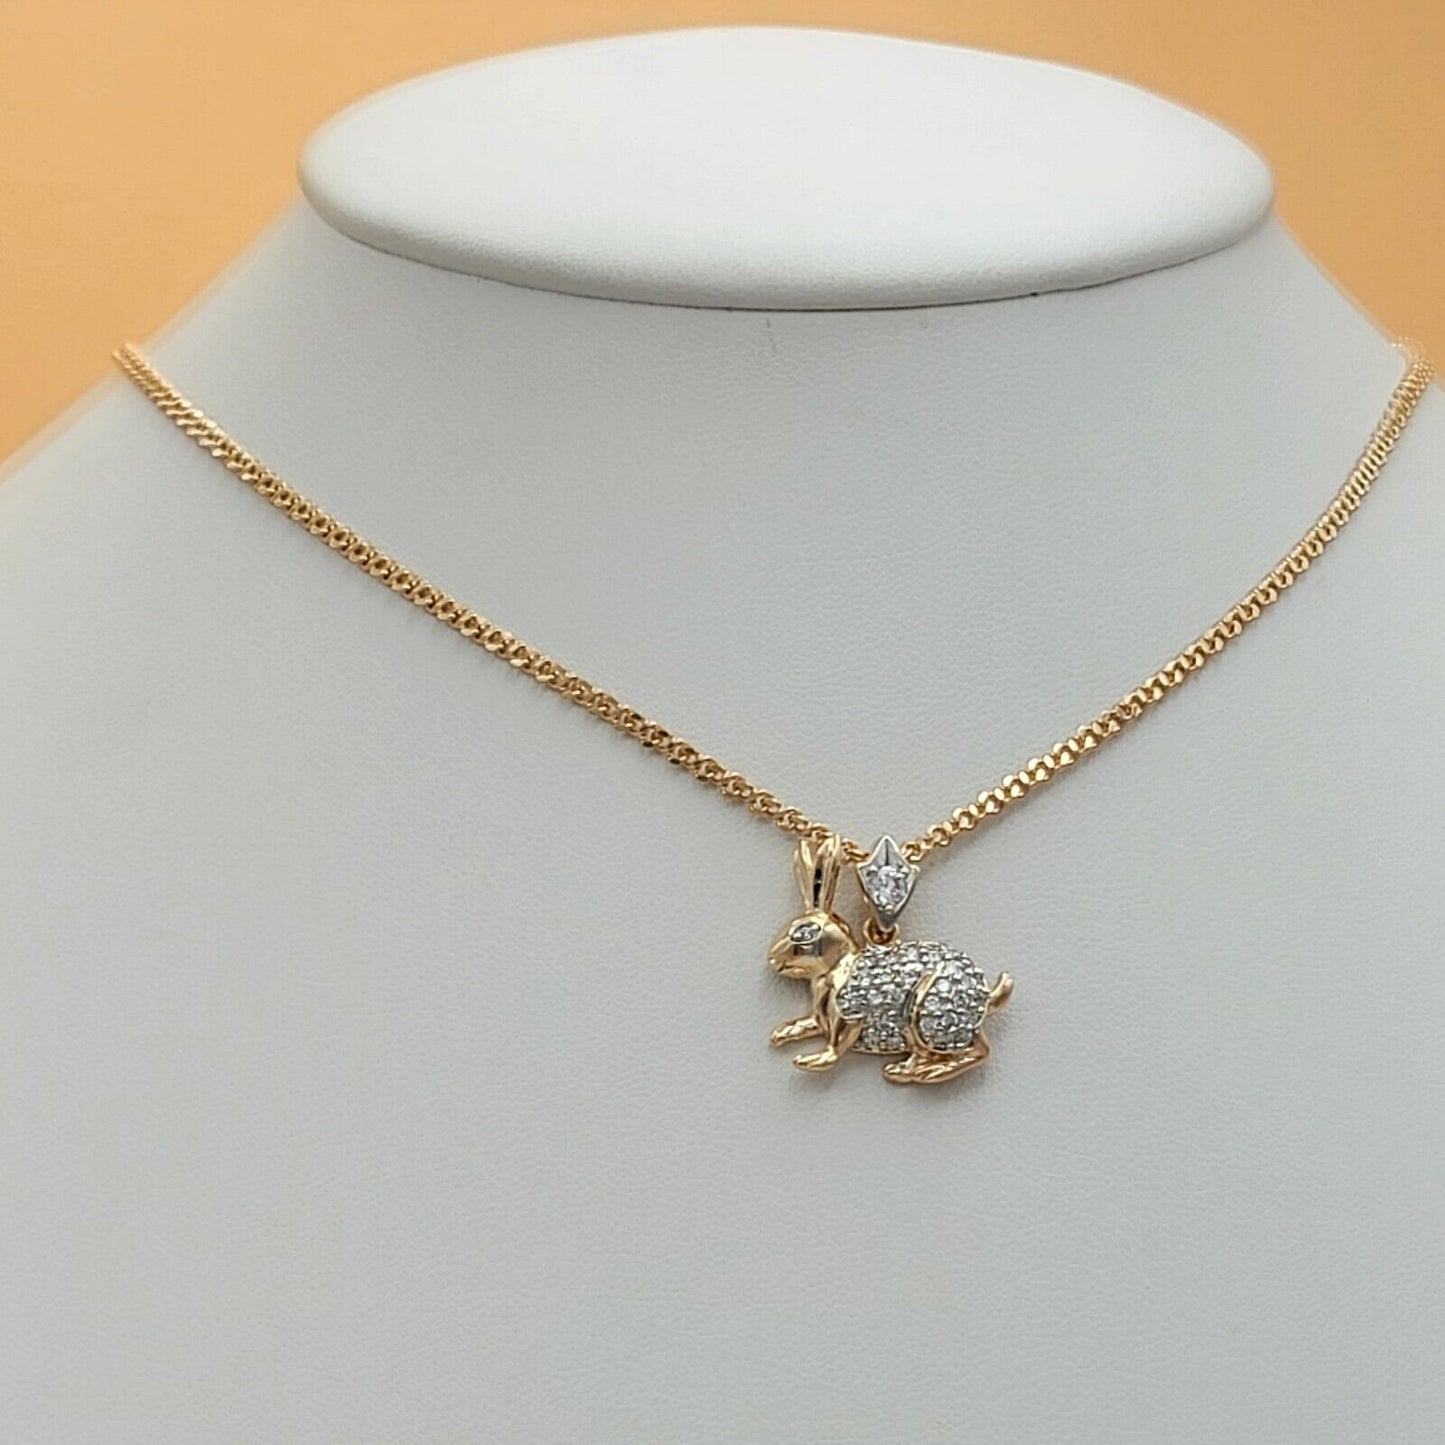 Necklaces - 18K Gold Plated. Clear Crystals Rabbit Bunny Pendant & Chain.